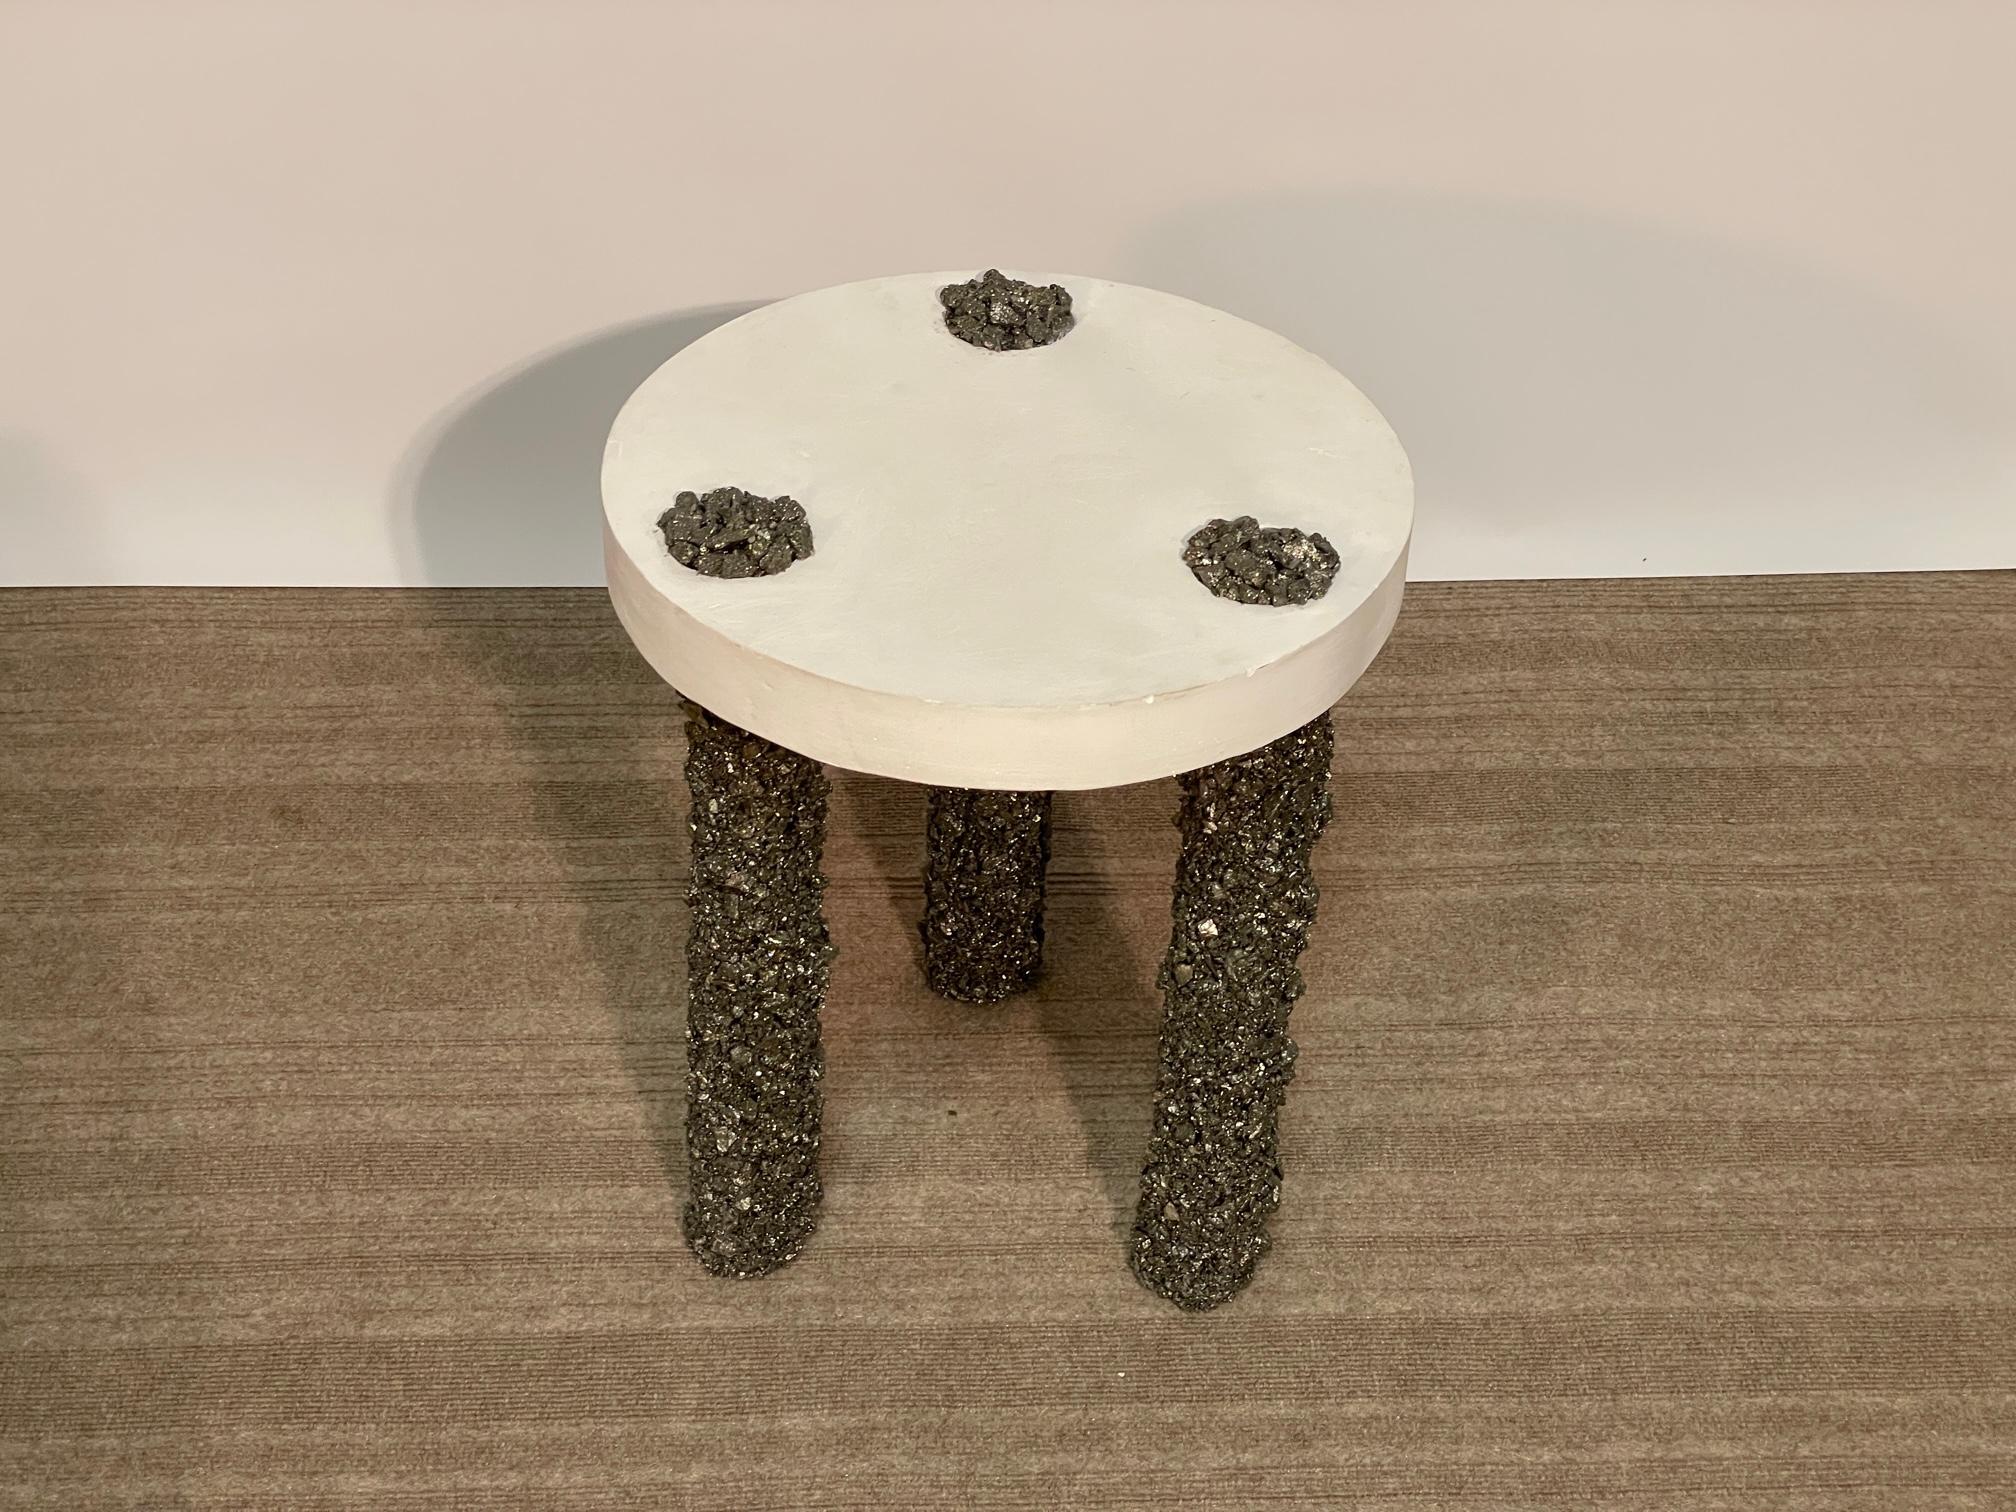 Hand made plastic-finished steel top supported by three substantial Pyrite legs create a very organic and energetic small side table or cocktail table.  A great conversation piece and functional table, this piece by Amoia Studio can stand out in a